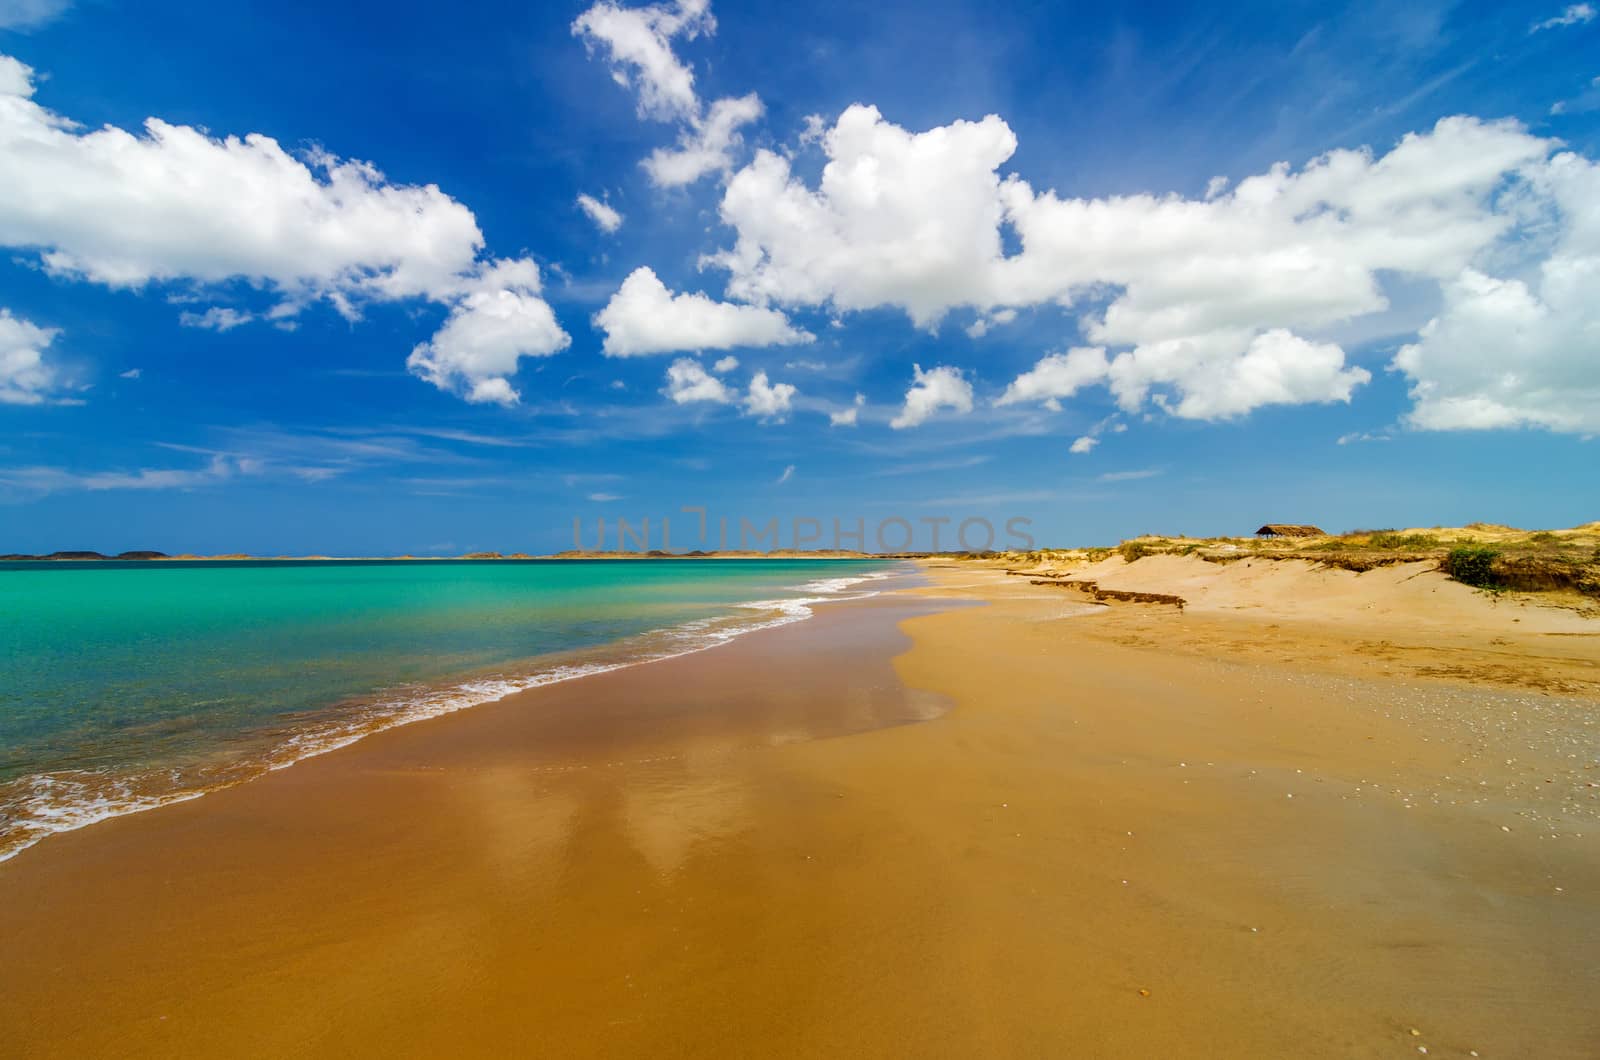 Wide deserted beach with turquoise Caribbean water in La Guajira, Colombia